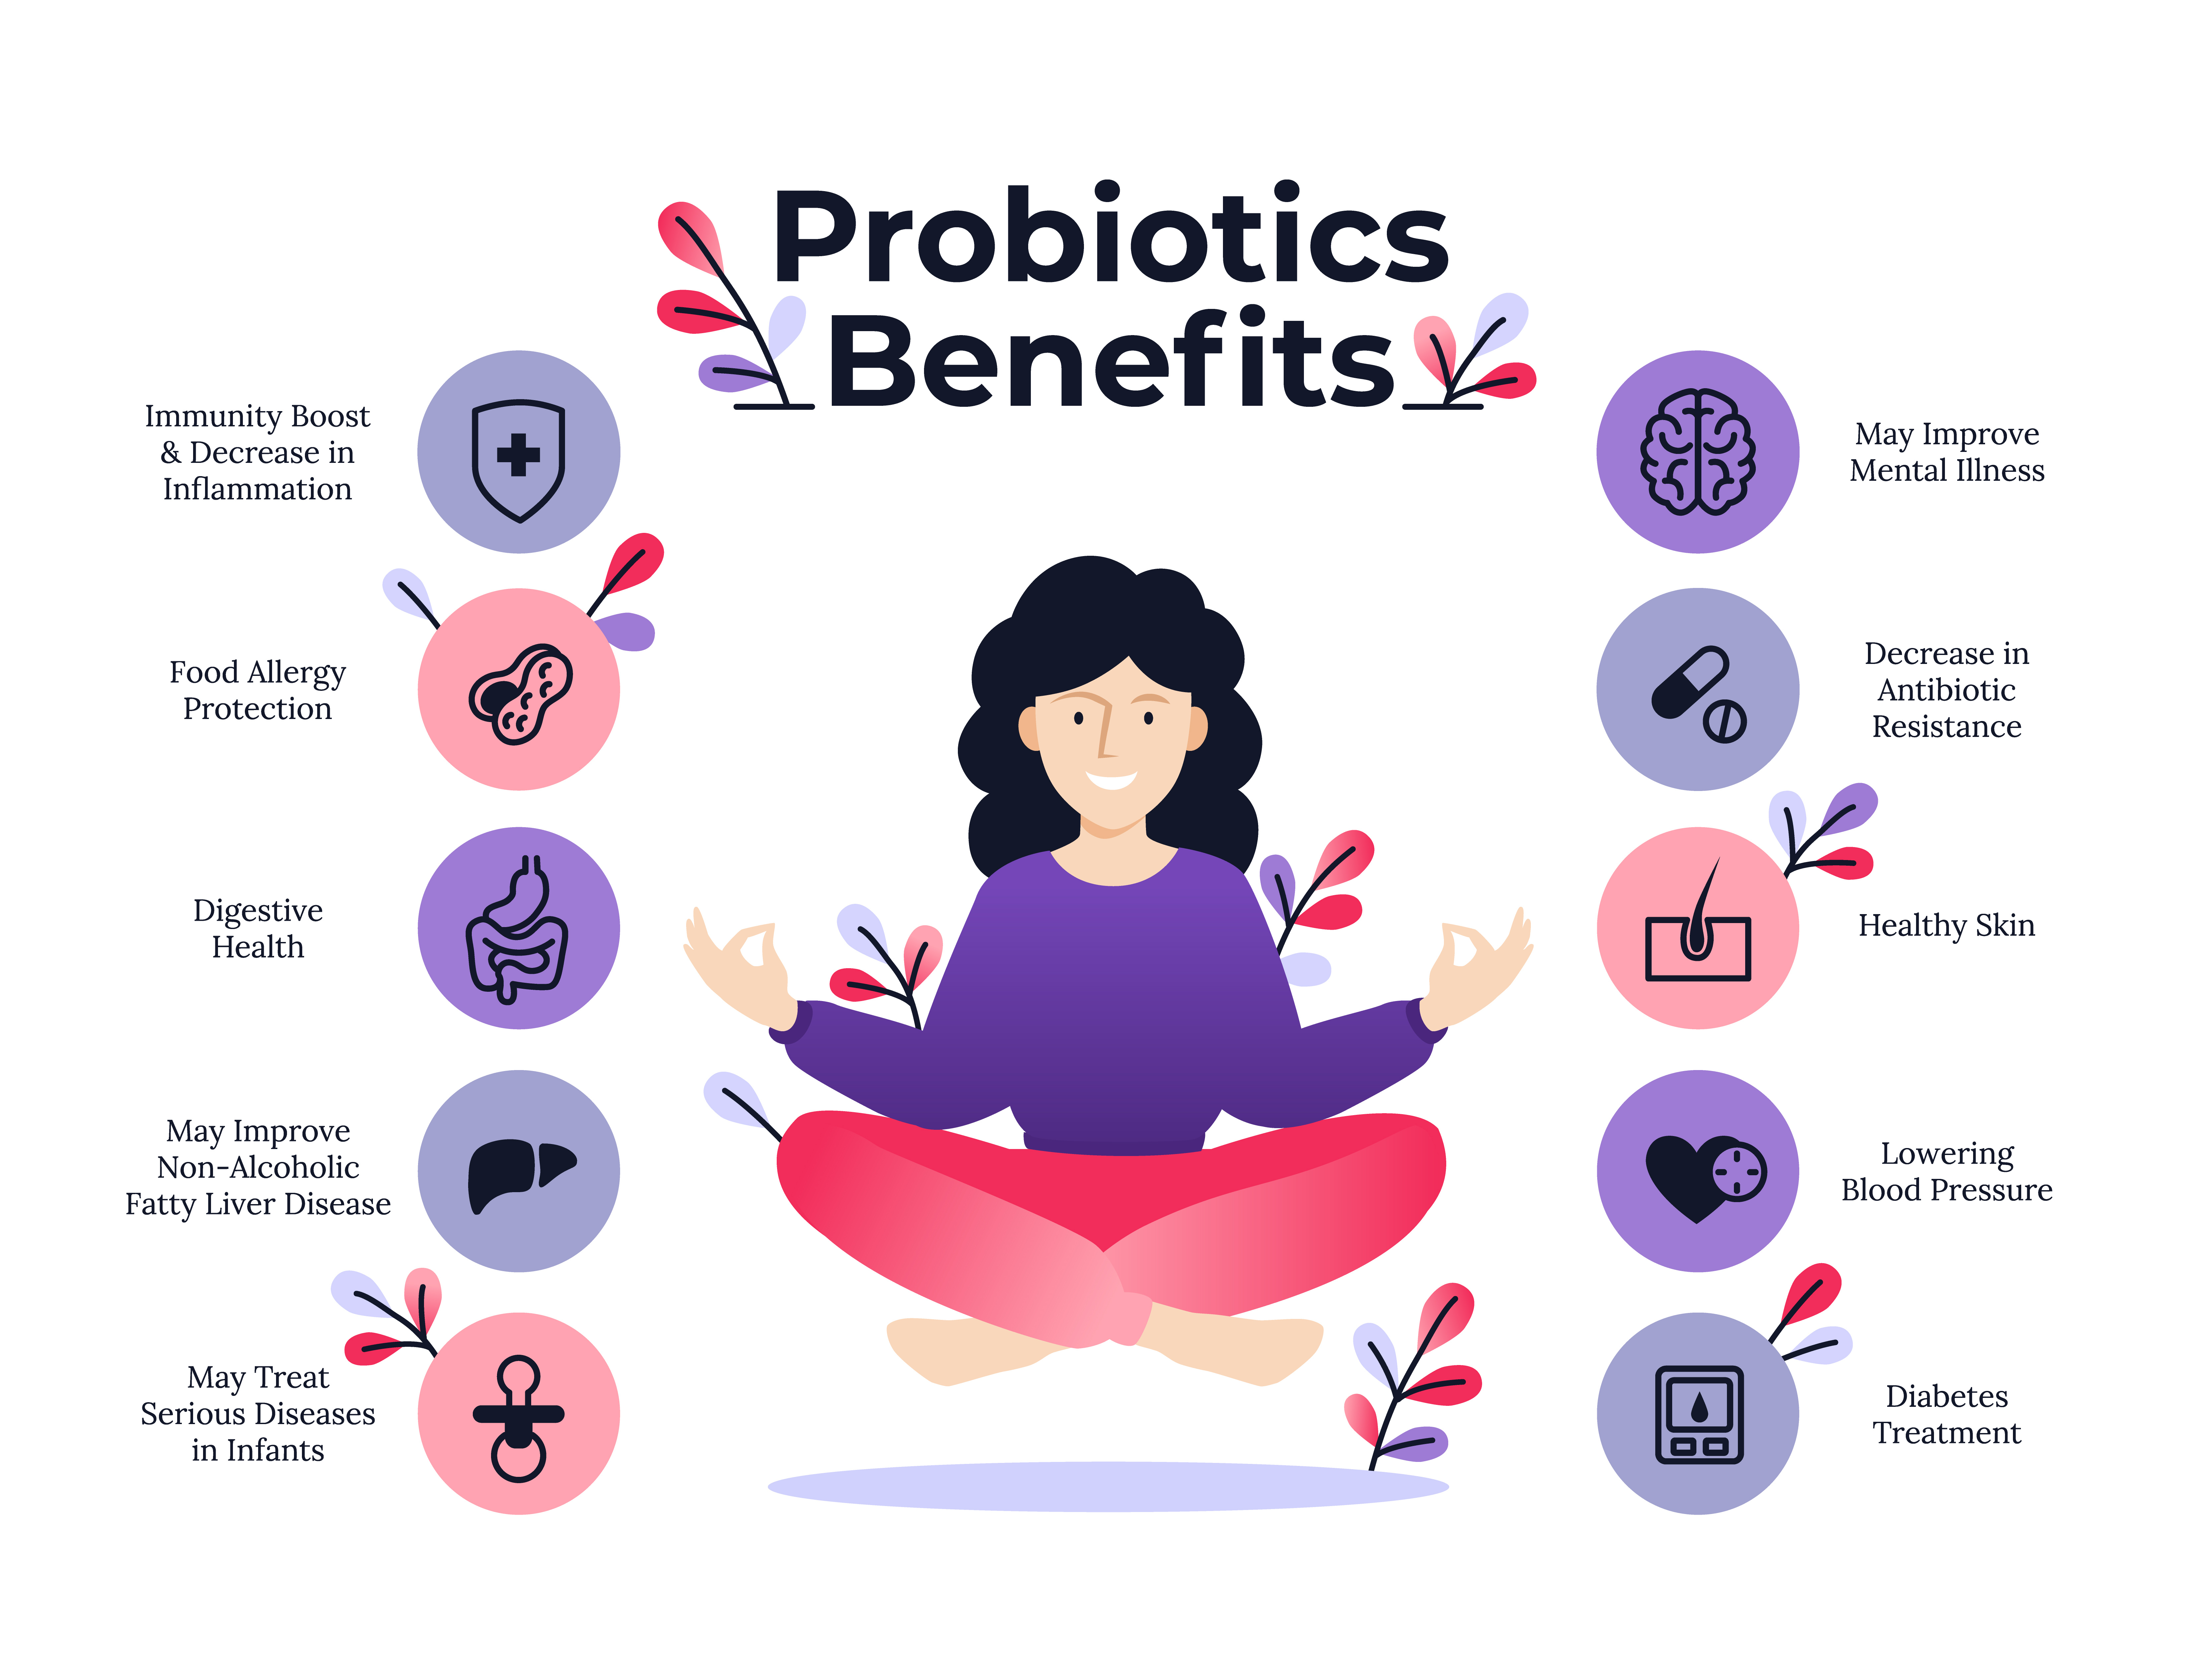 What are the most important benefits of proobiotics usage?